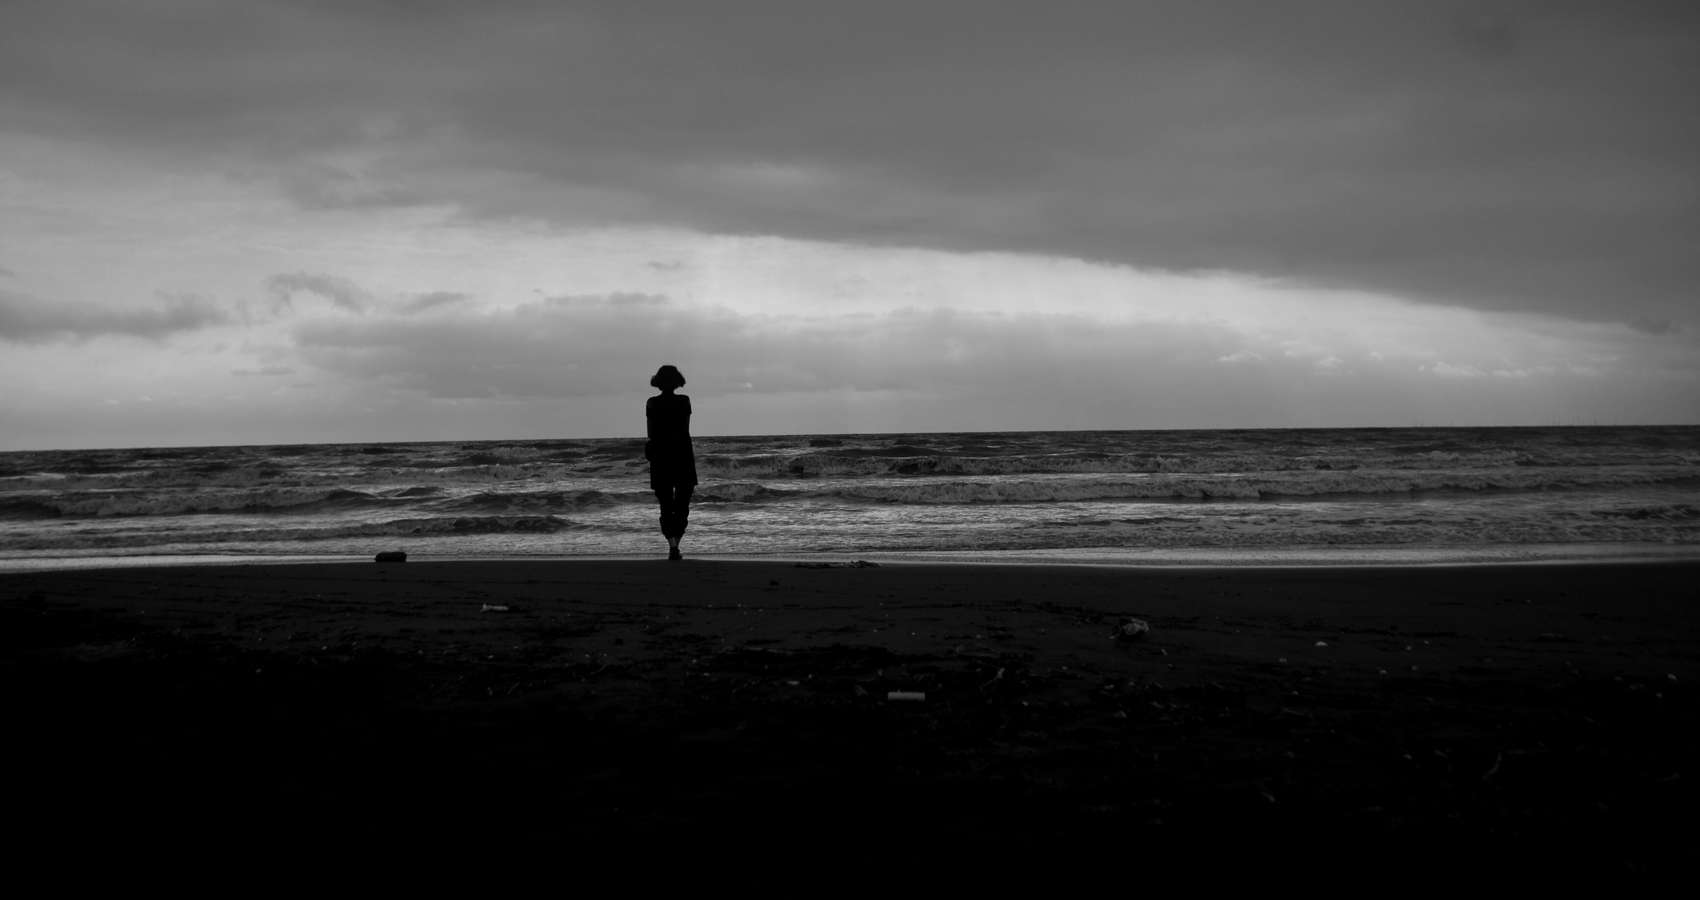 Oceans Apart, poetry by Heidi MacCulloch at Spillwords.com